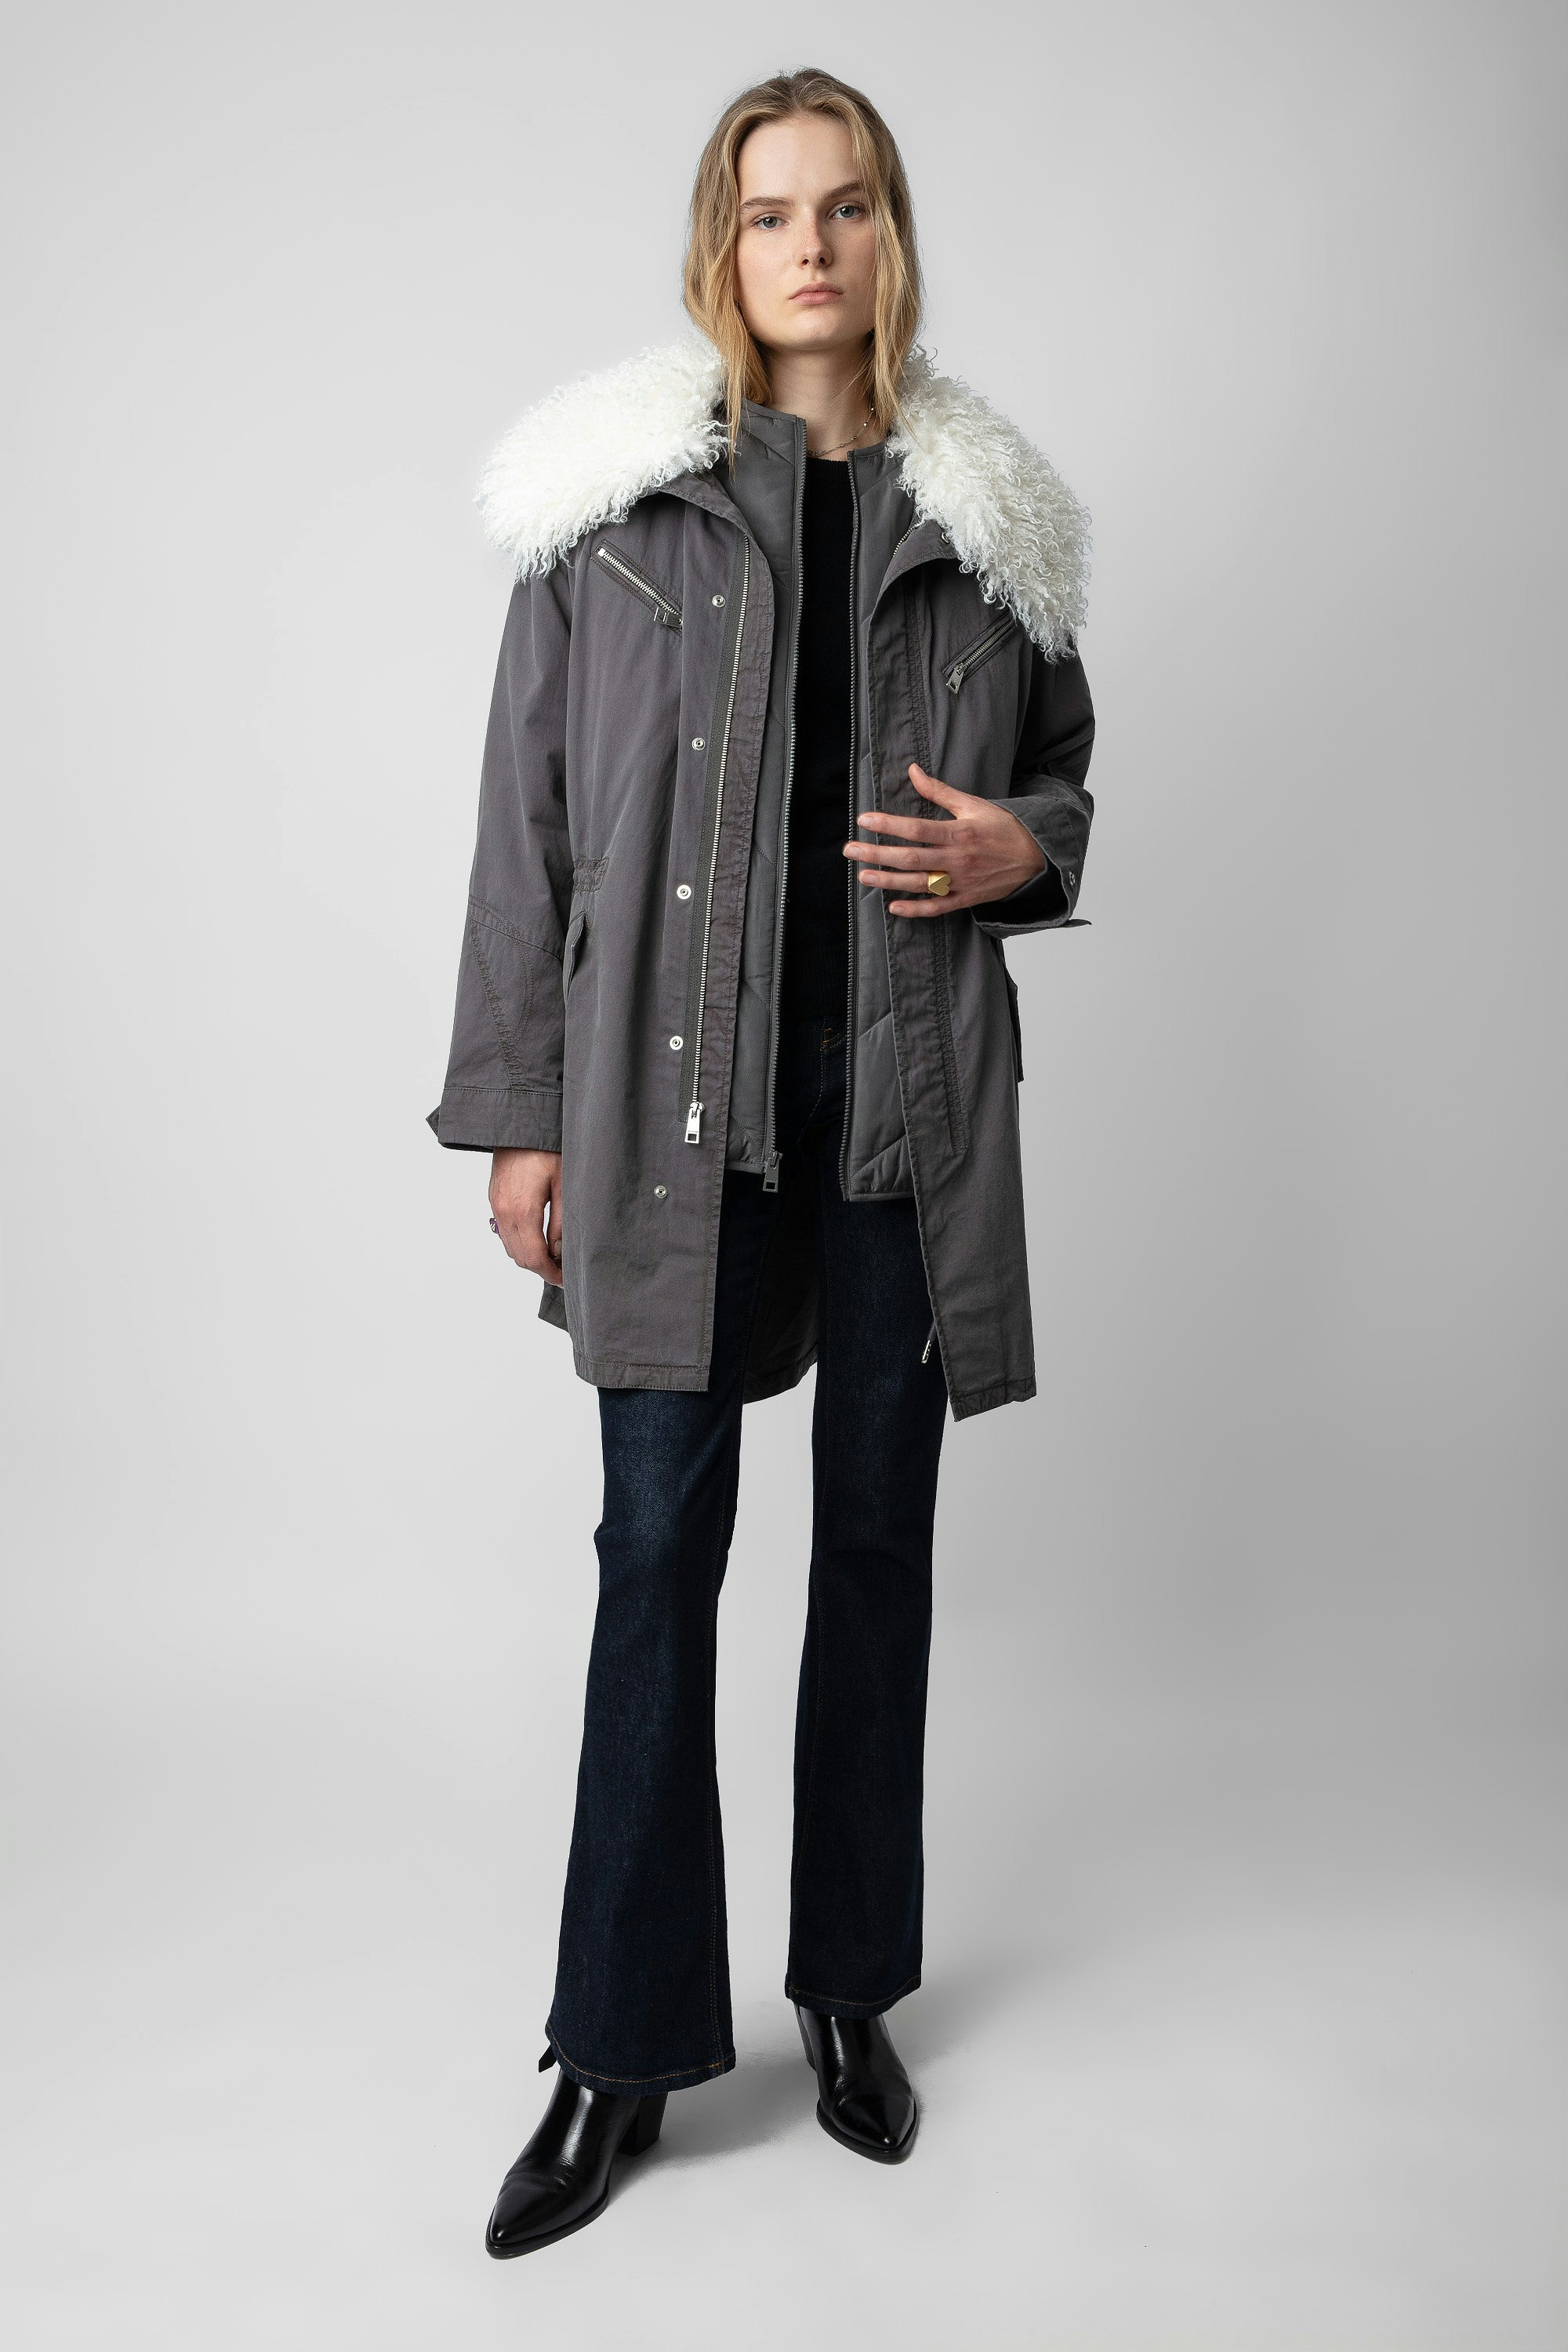 Kidea Parka - Women’s oversized military midi parka in grey cotton with faux fur collar.